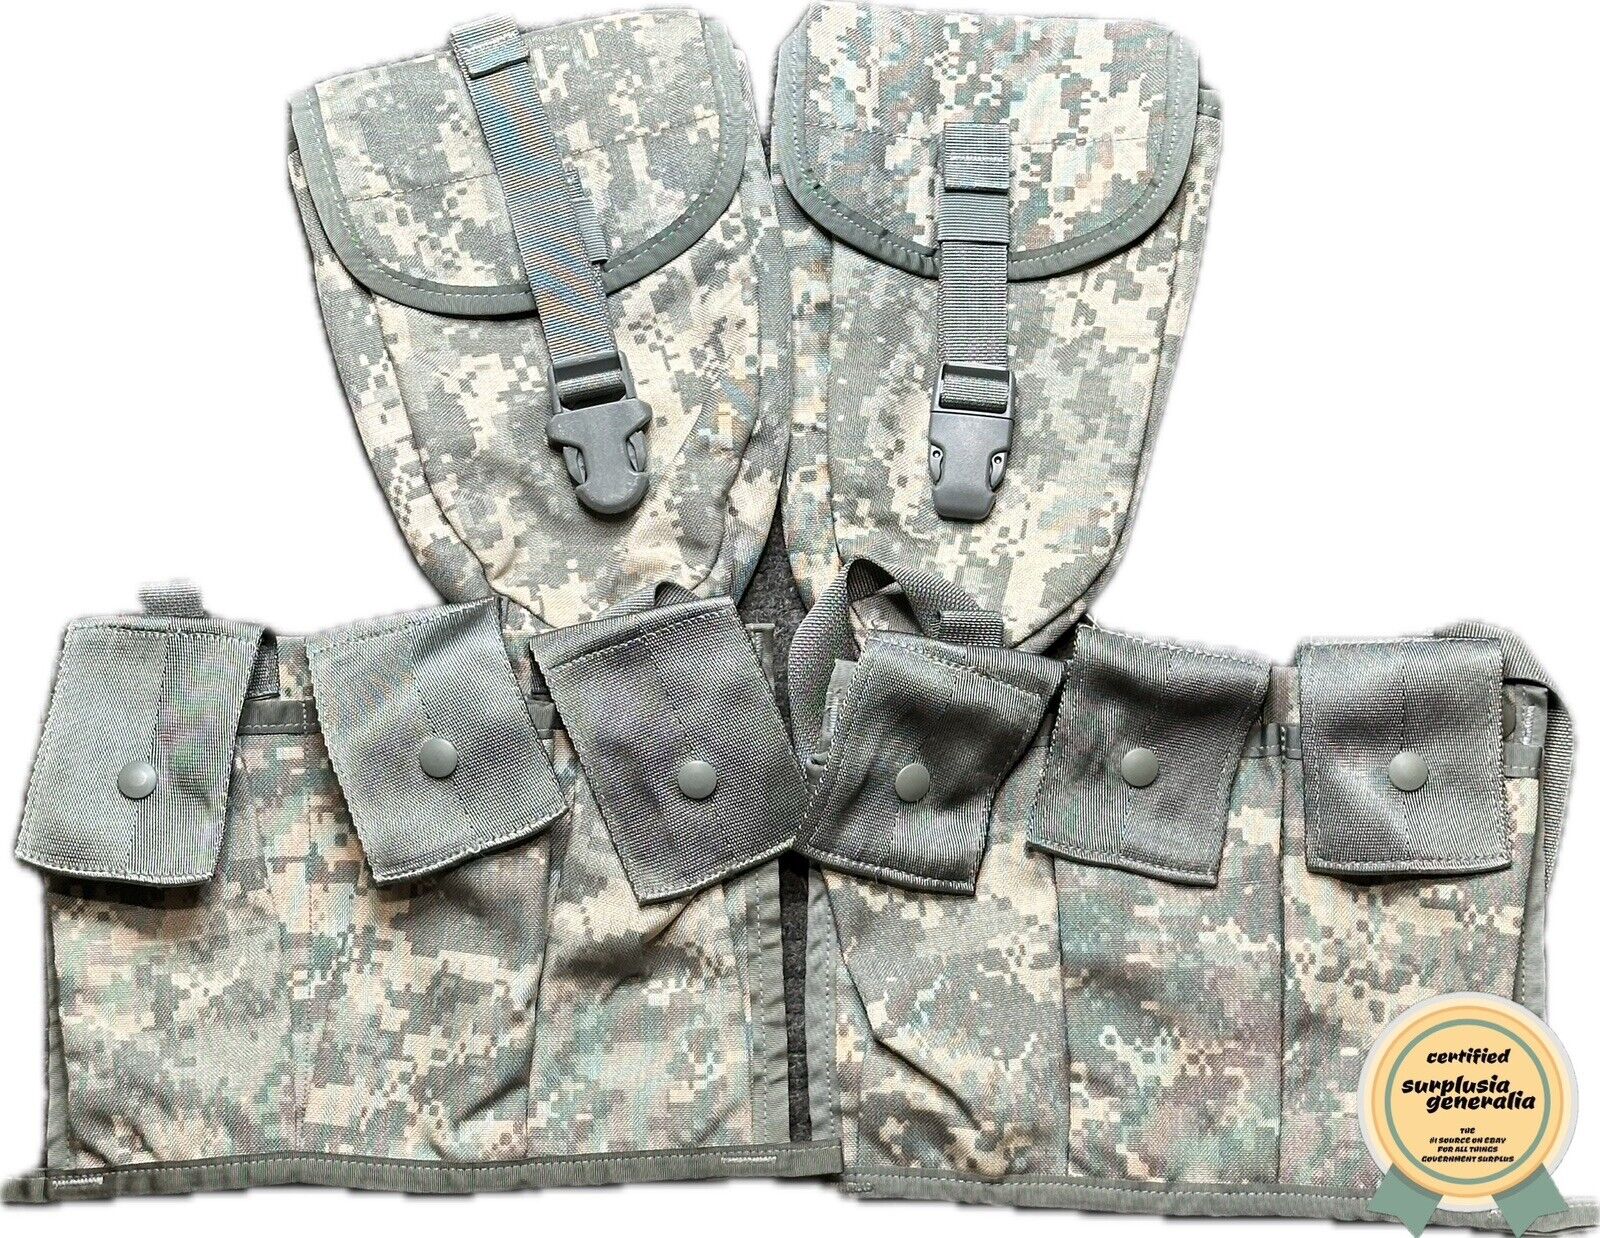 US Army MOLLE II Support Pouch Set 4 Piece Kit E-Tool Pouches & Bandoleers